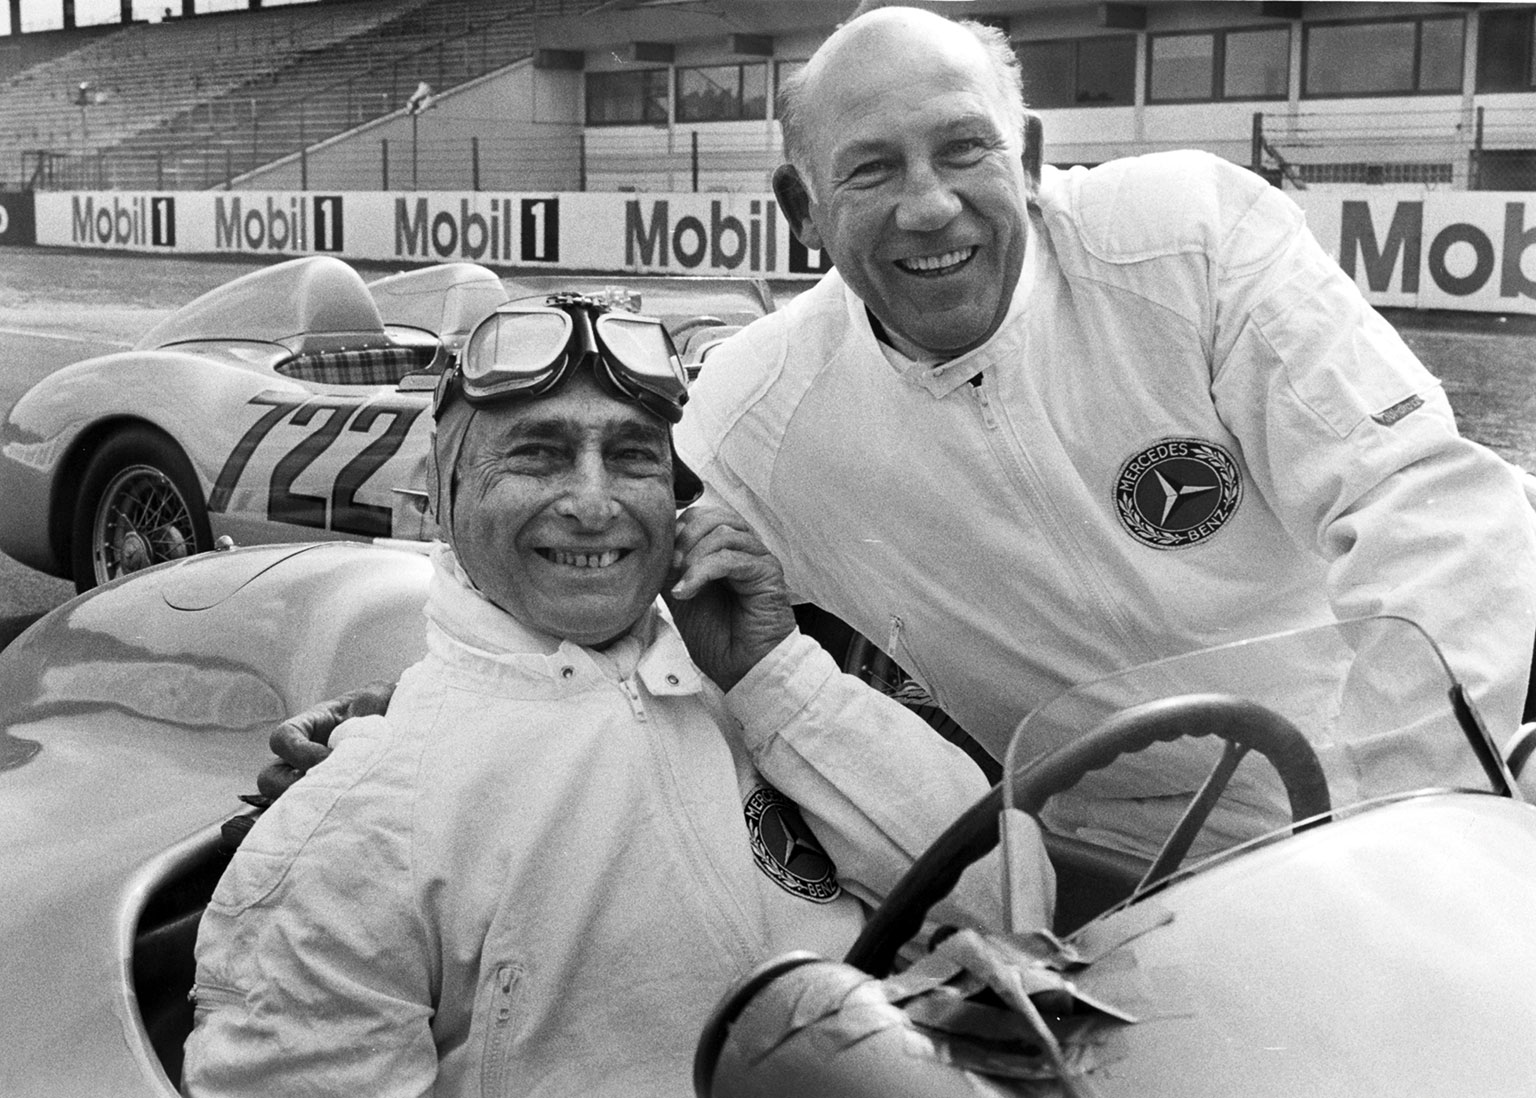 Stirling Moss and Juan Manuel Fangio in 1991